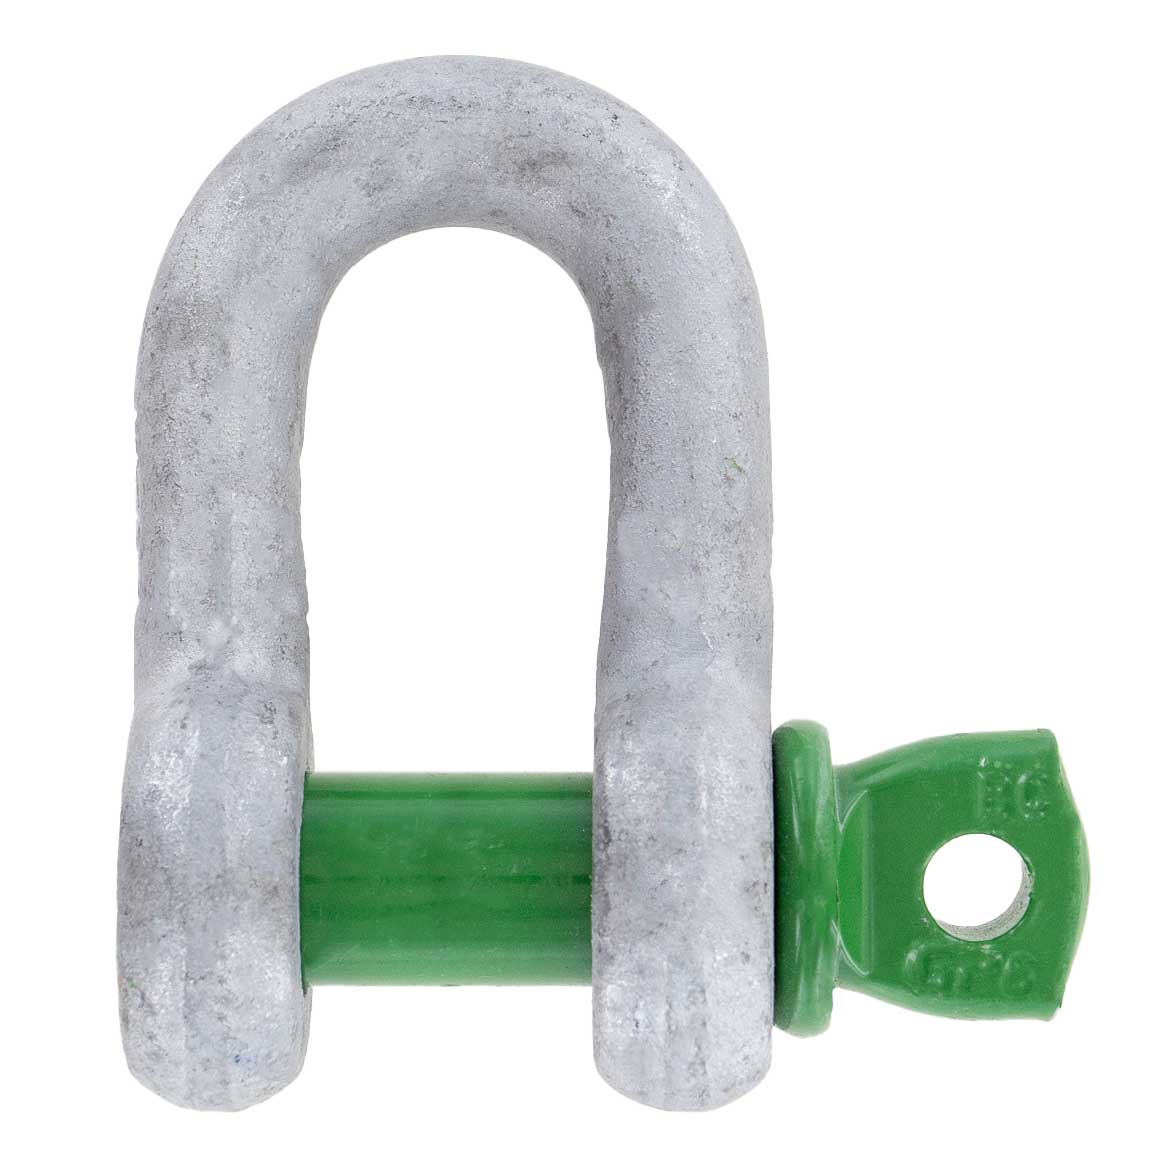 1-1/4" Van Beest Green Pin® Screw Pin Chain Shackle | G-4151 - 12 Ton primary image